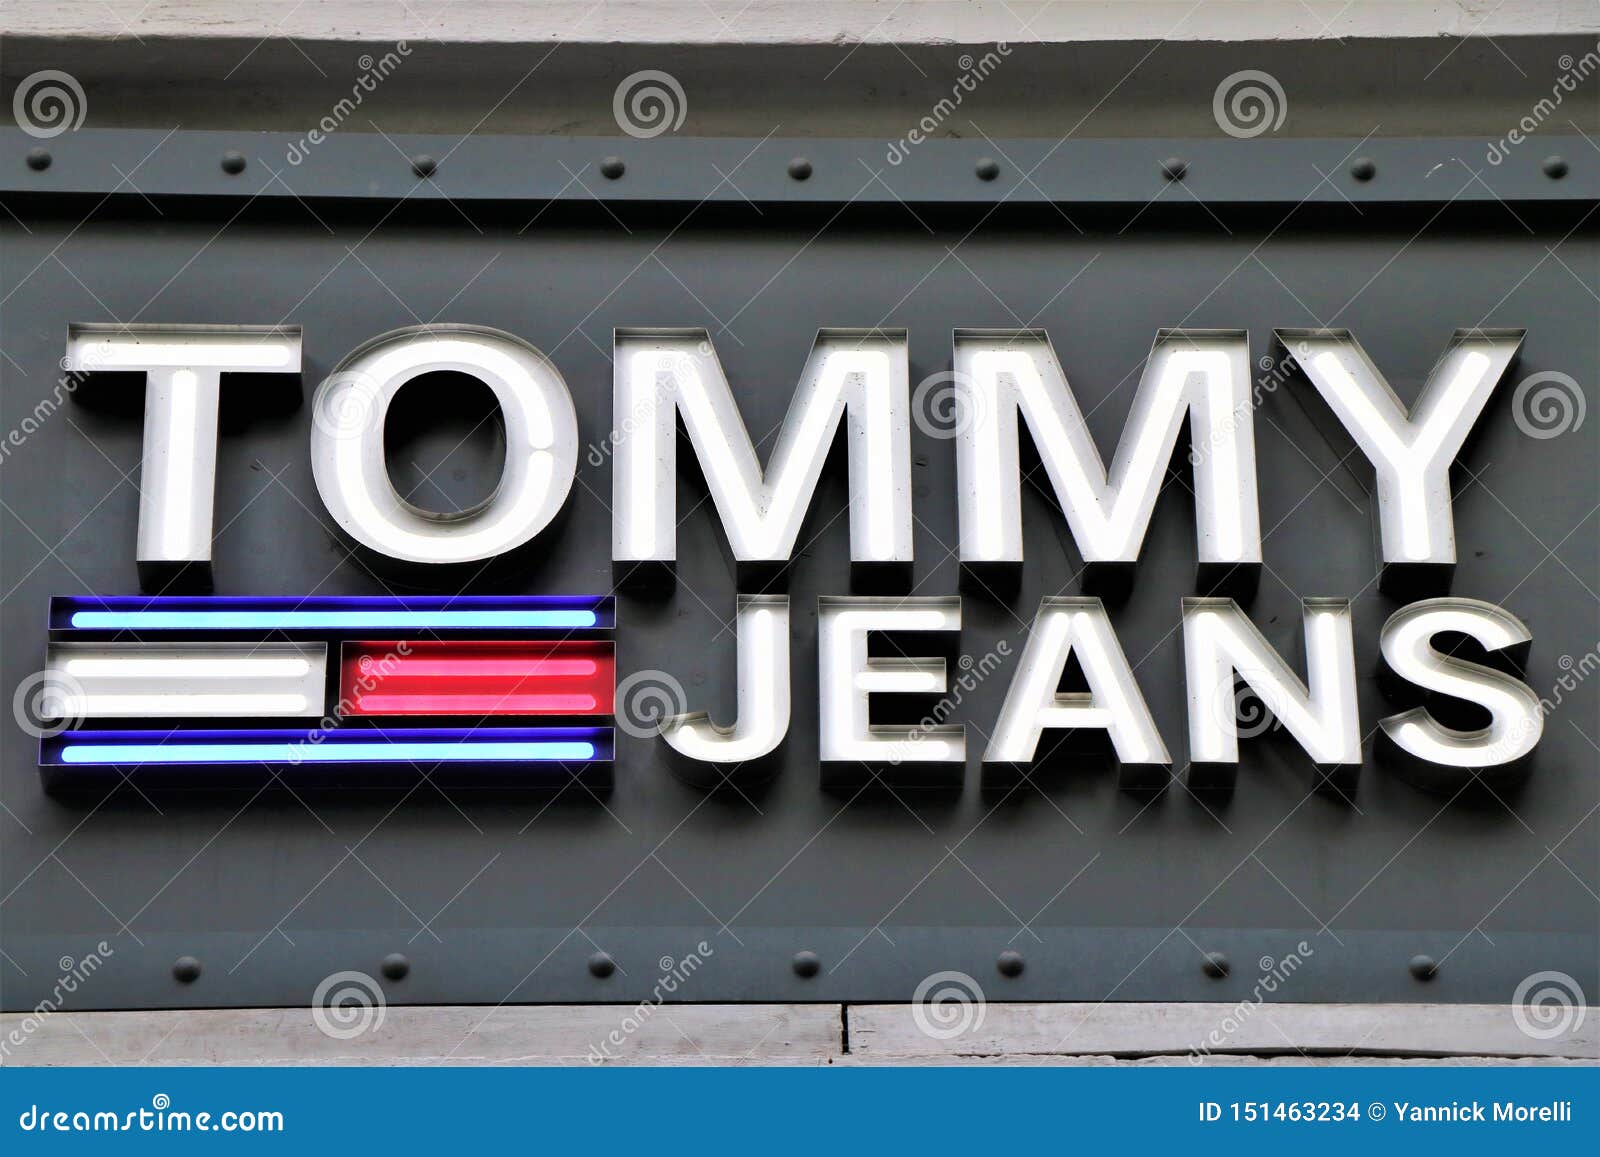 of a Tommy Hilfiger Clothing Editorial Stock Image - Image hilfiger, commercial: 151463234